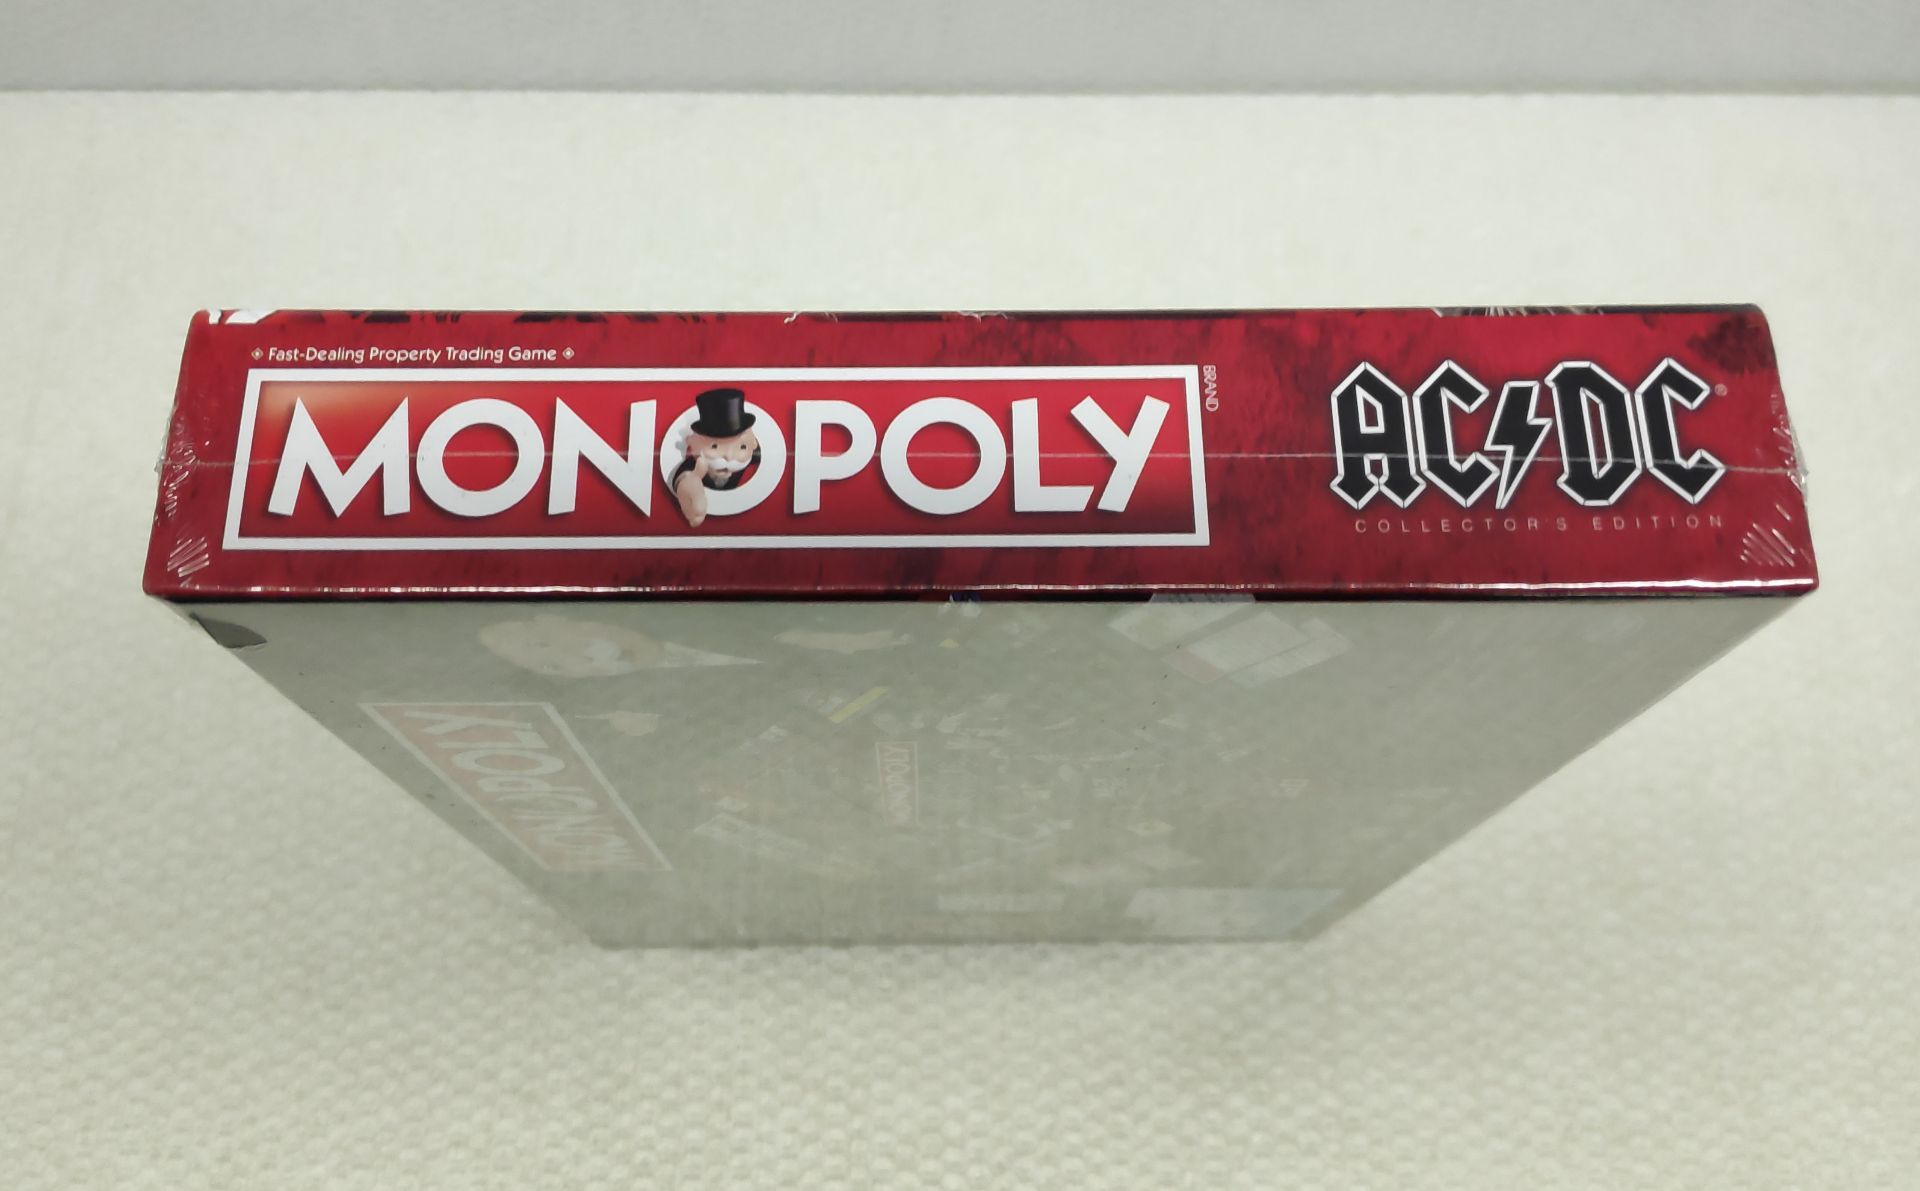 1 x AC/DC Collector's Edition Monopoly - New/Sealed - HTYS169 - CL720 - Location: Altrincham WA14<BR - Image 7 of 8